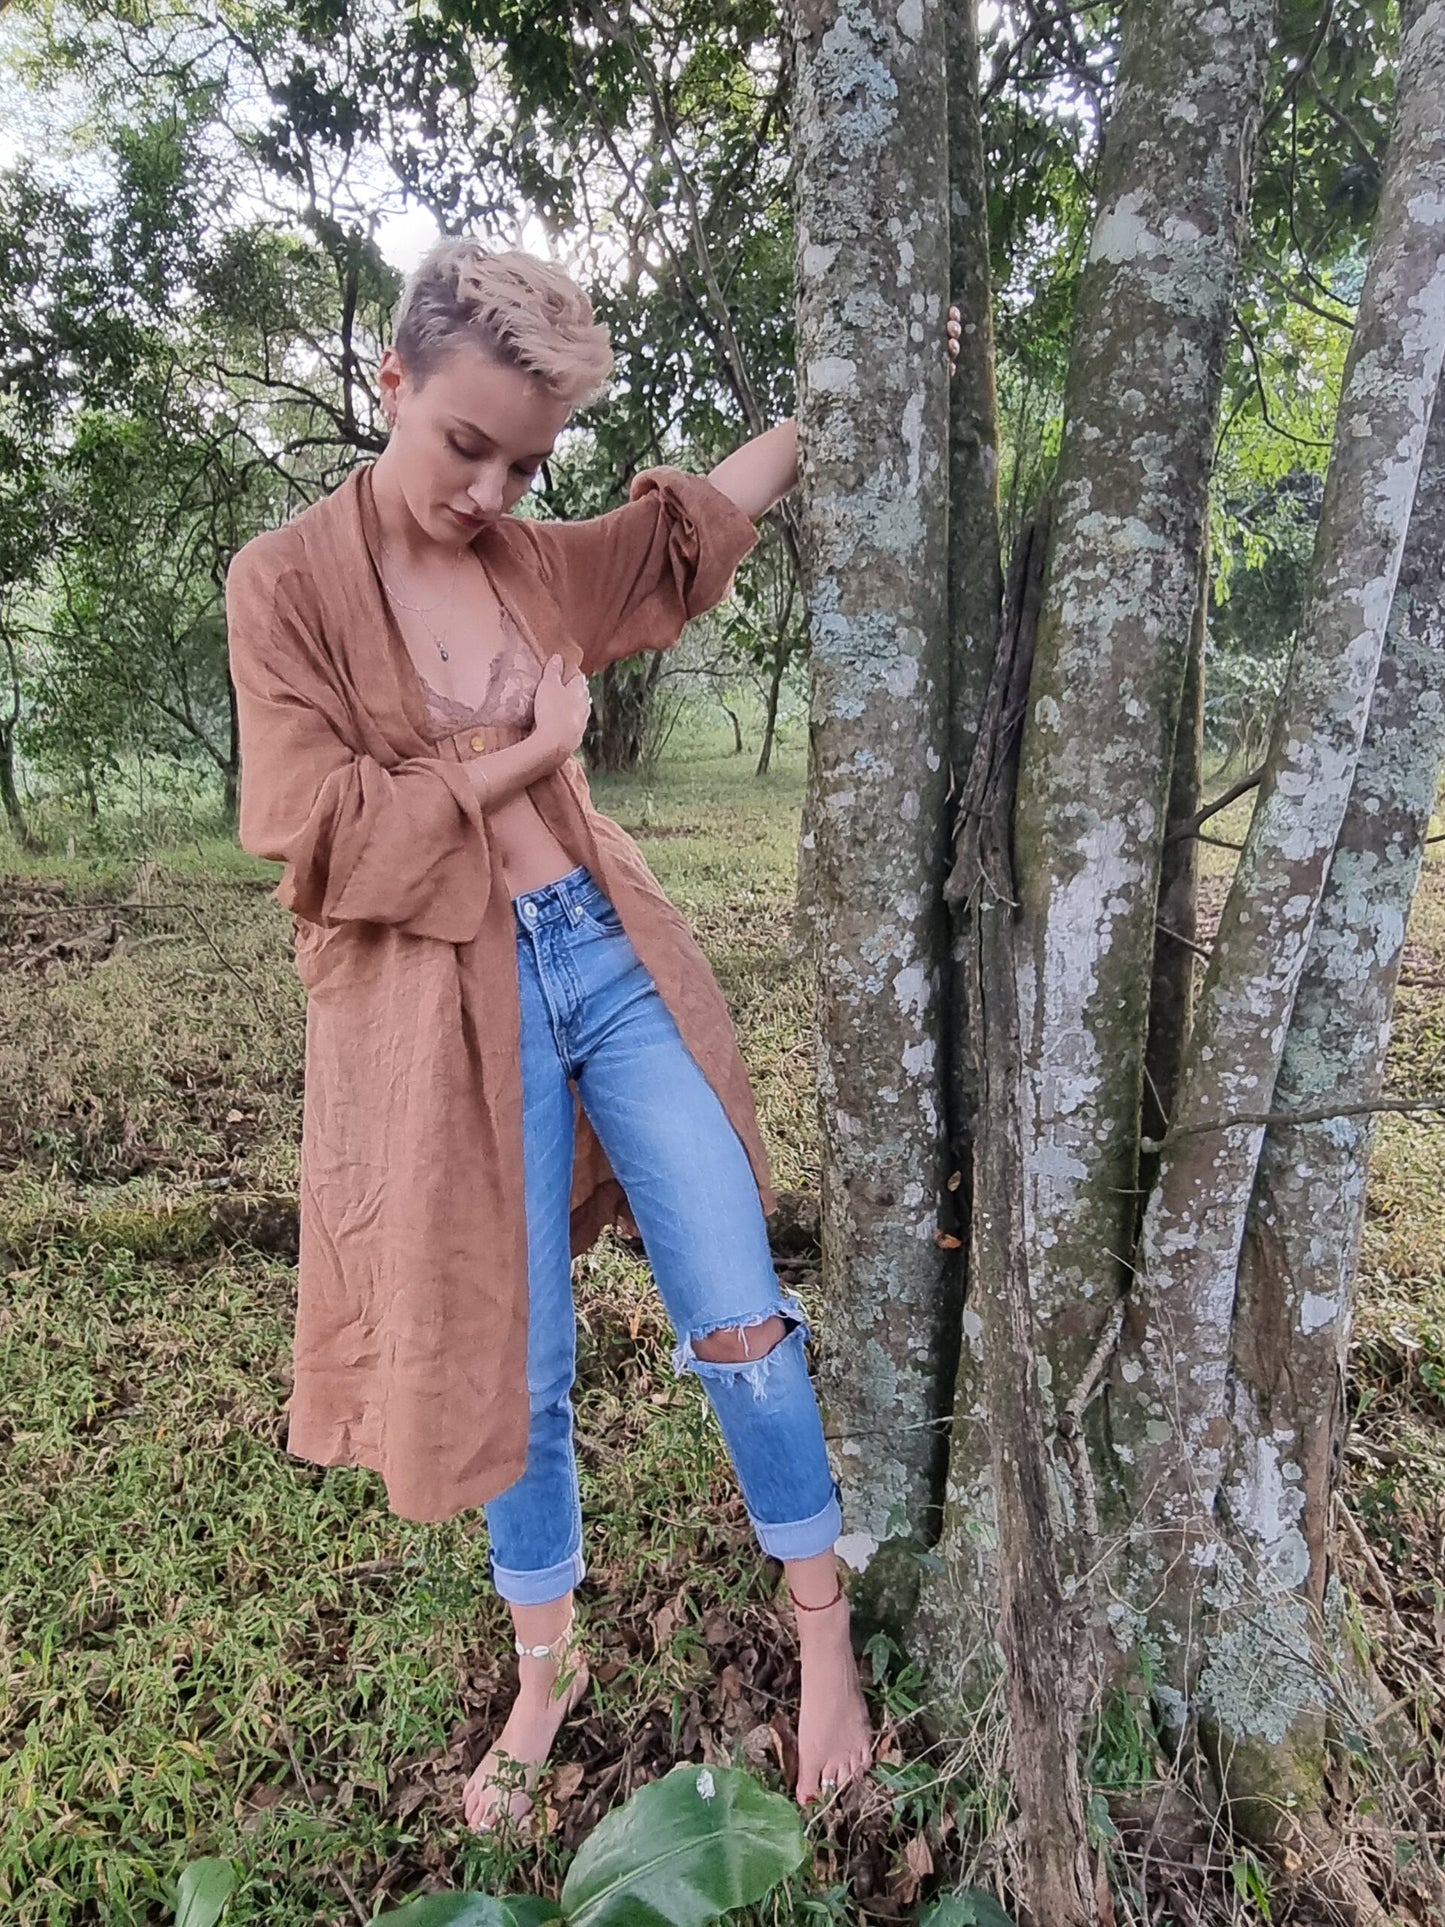 Stylish lady stands outdoors in nature alongside a tree wearing a rust coloured linen kimono, and light pink lace bralet and blue demin long pants. The linen kimono is hanging open showing the pink bralet that is worn underneath.